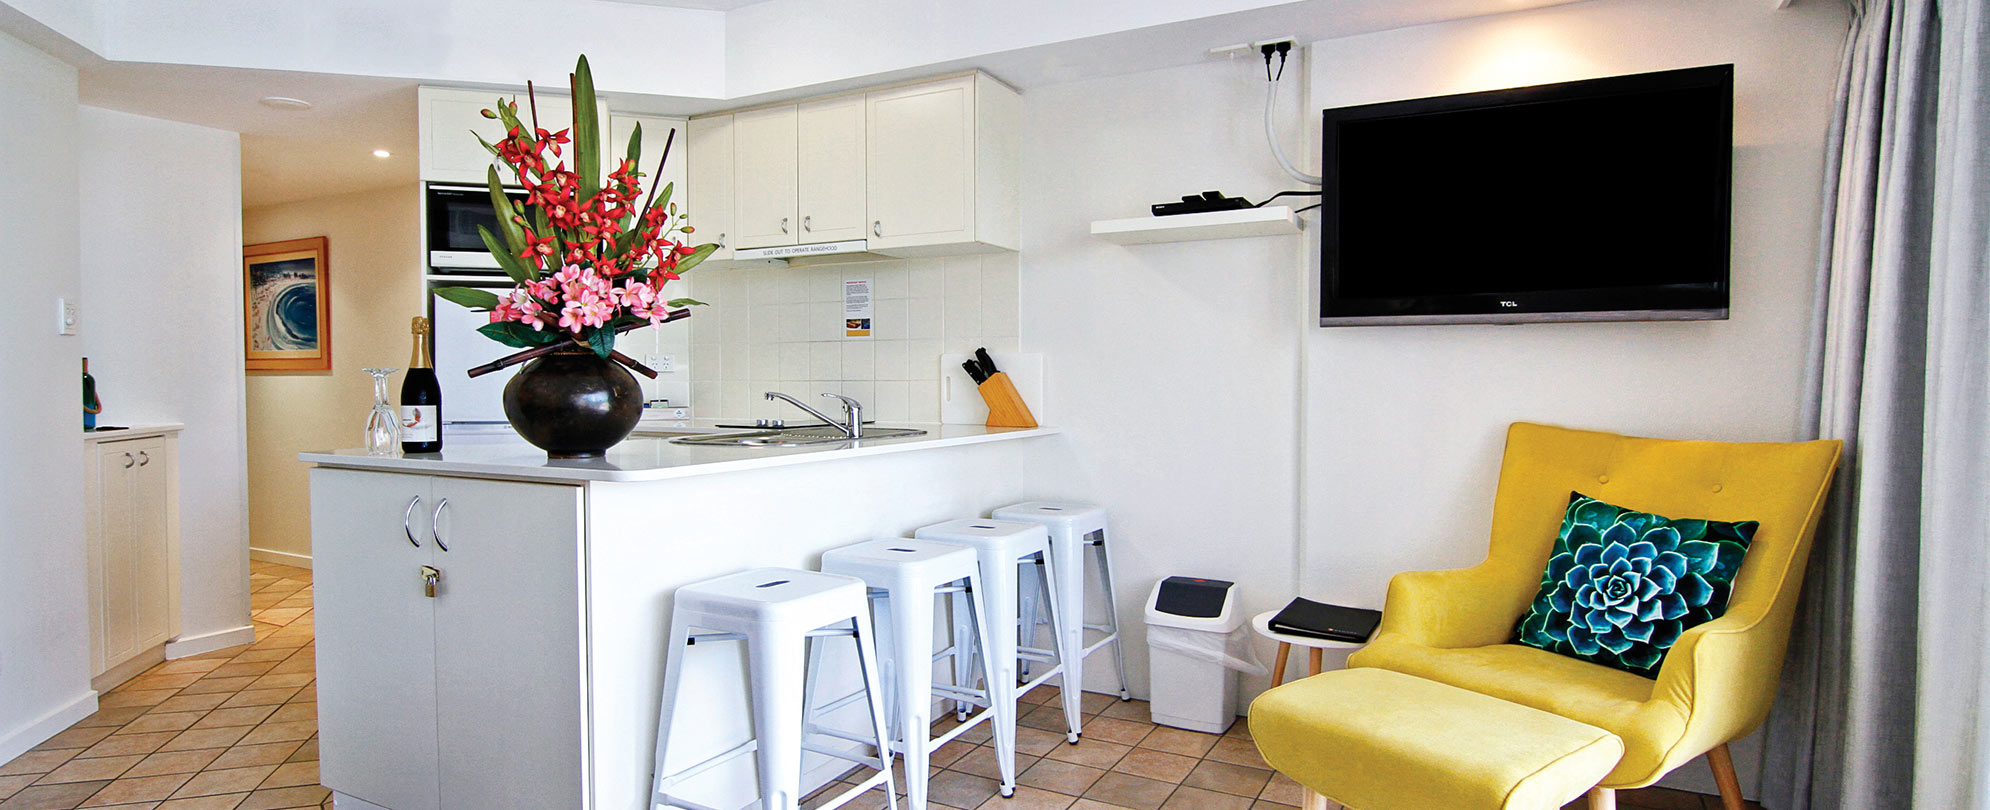 The kitchen area in a 1-bedroom suite at Club Wyndham Golden Beach.